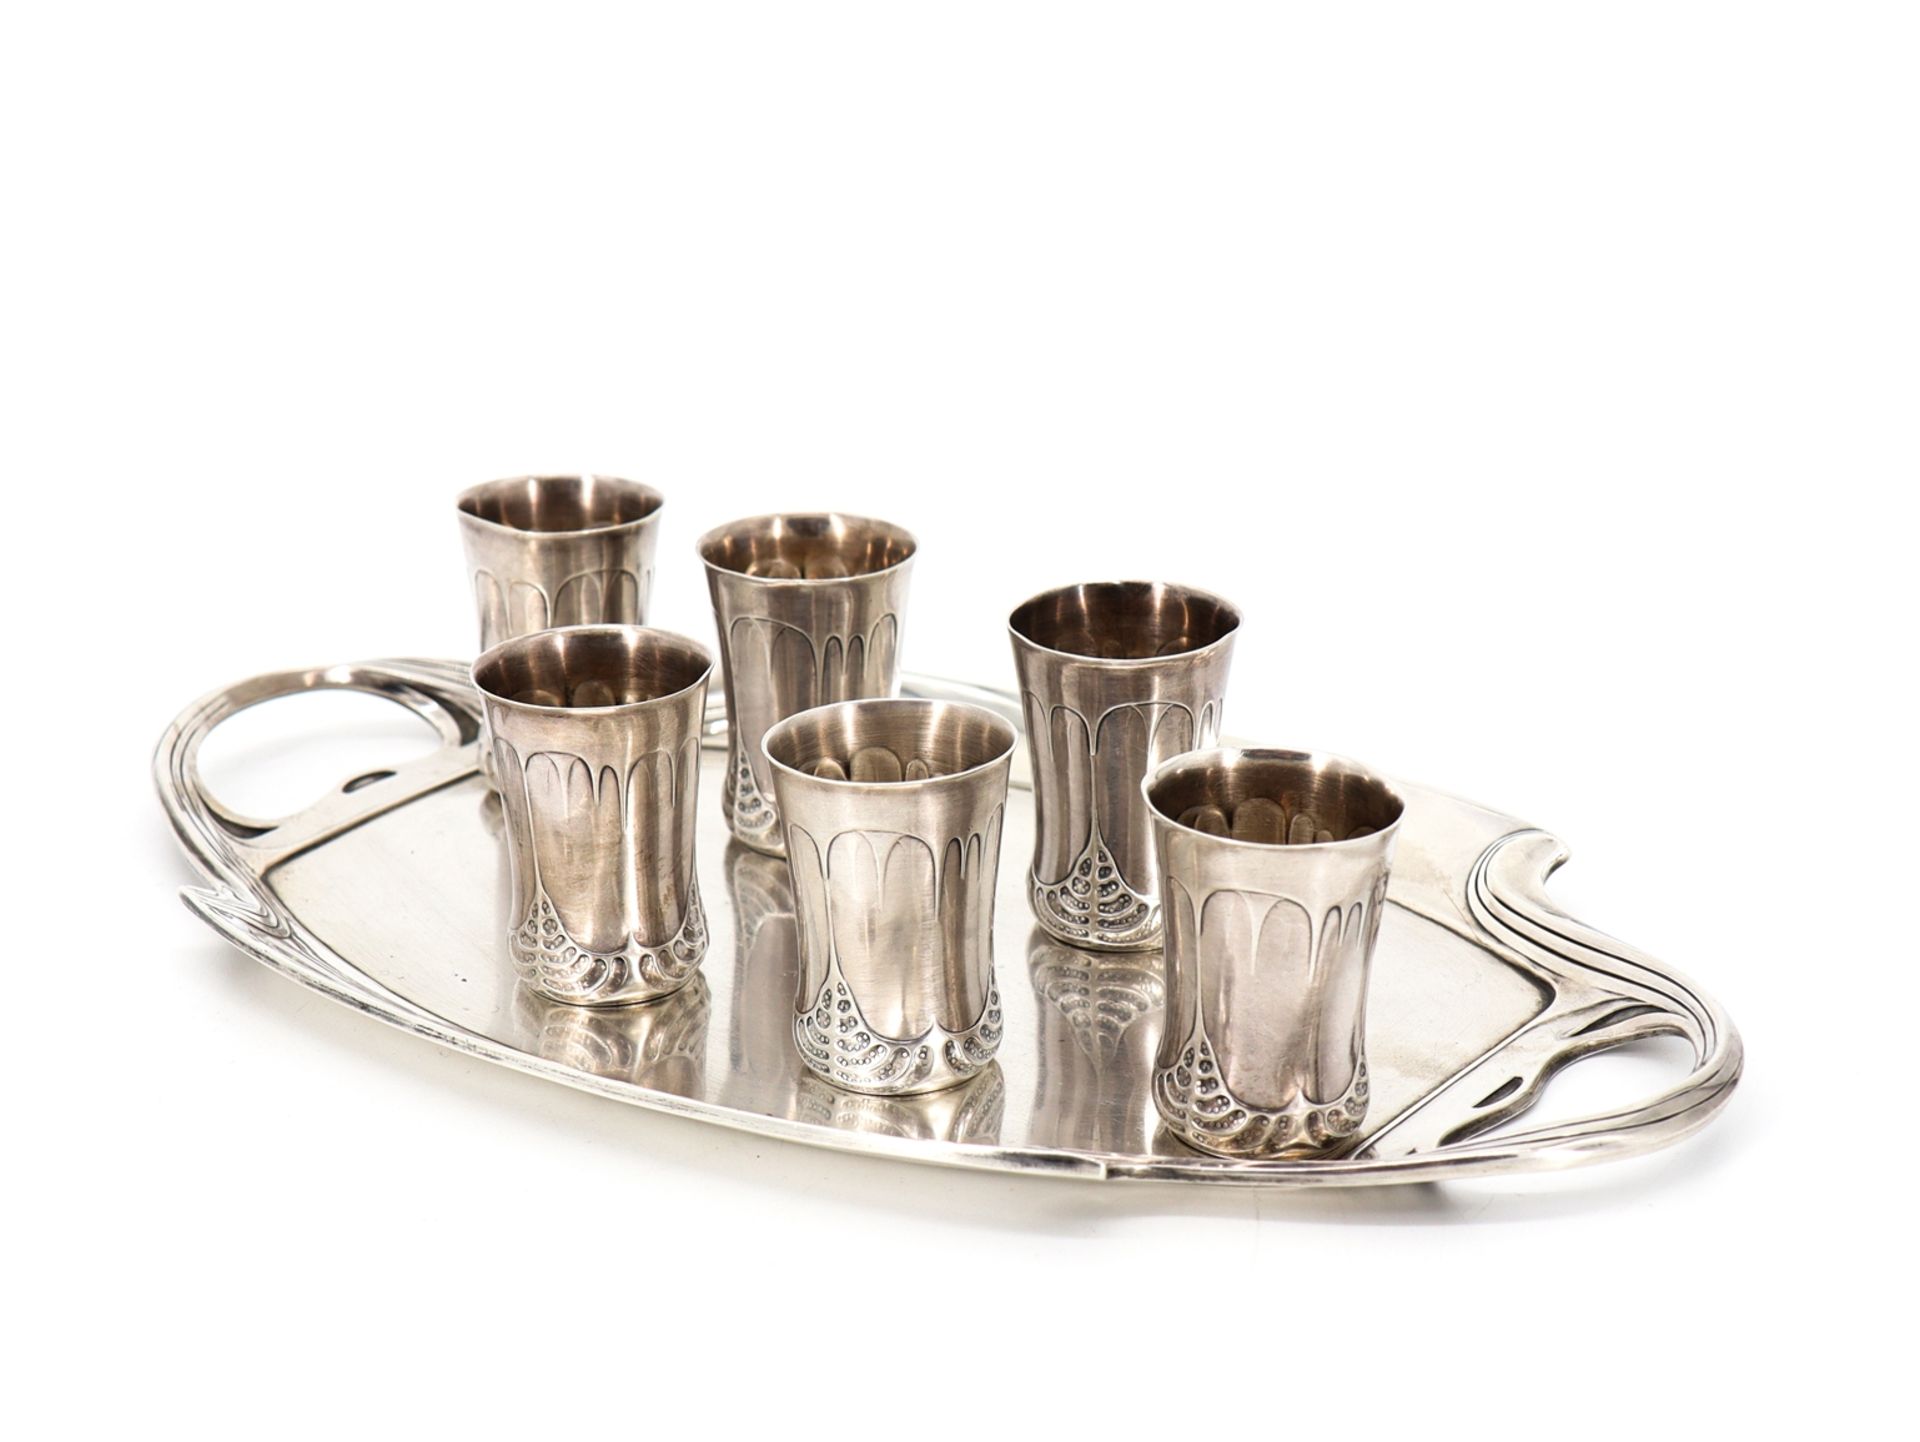 Art Nouveau tray in 925 sterling silver with 6 cups around 1900.